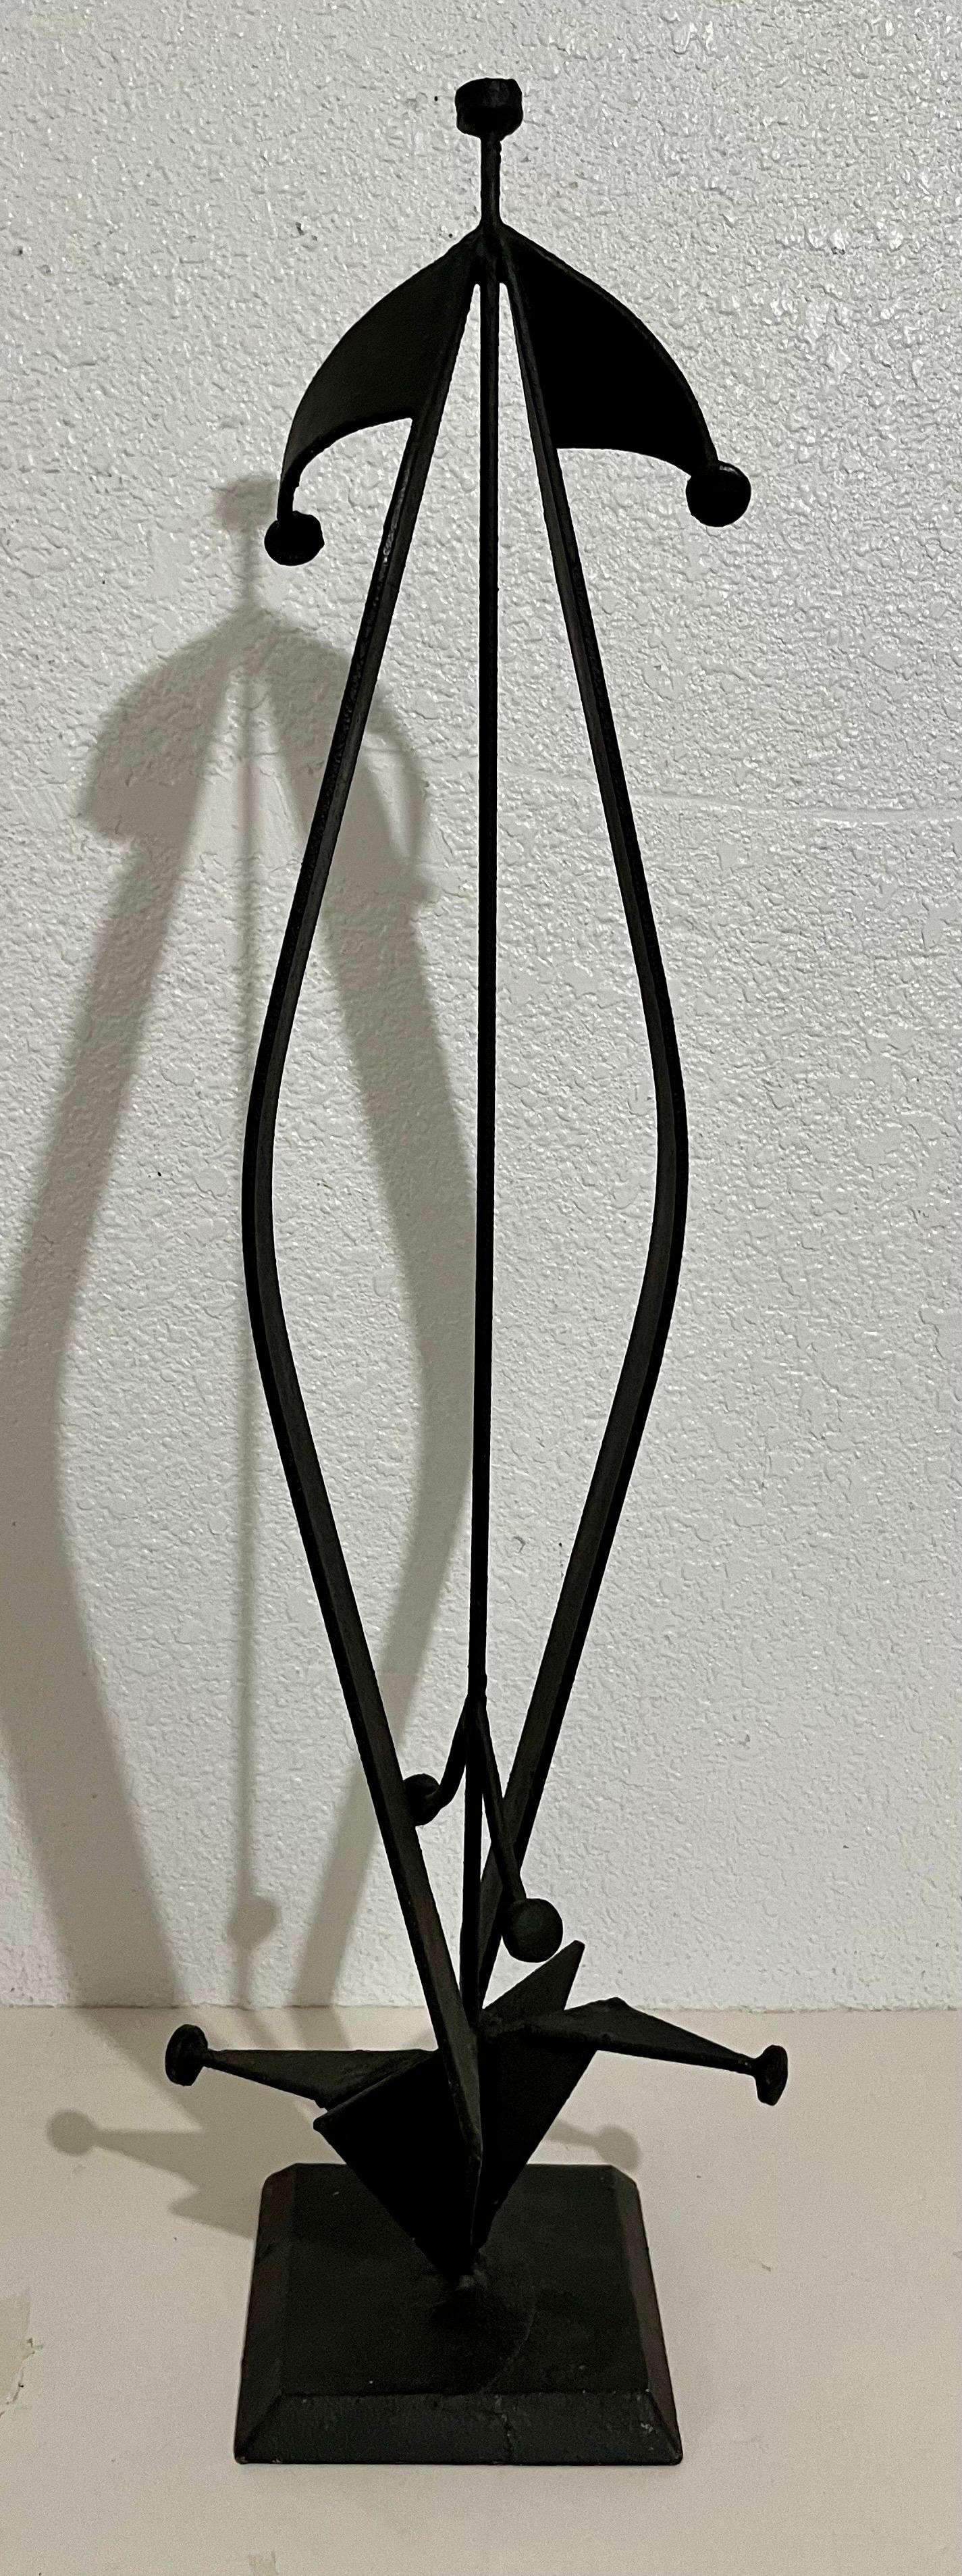 Large Mario Almaguer Cuban Art Welded Painted Steel Abstract Sculpture Modernism For Sale 3